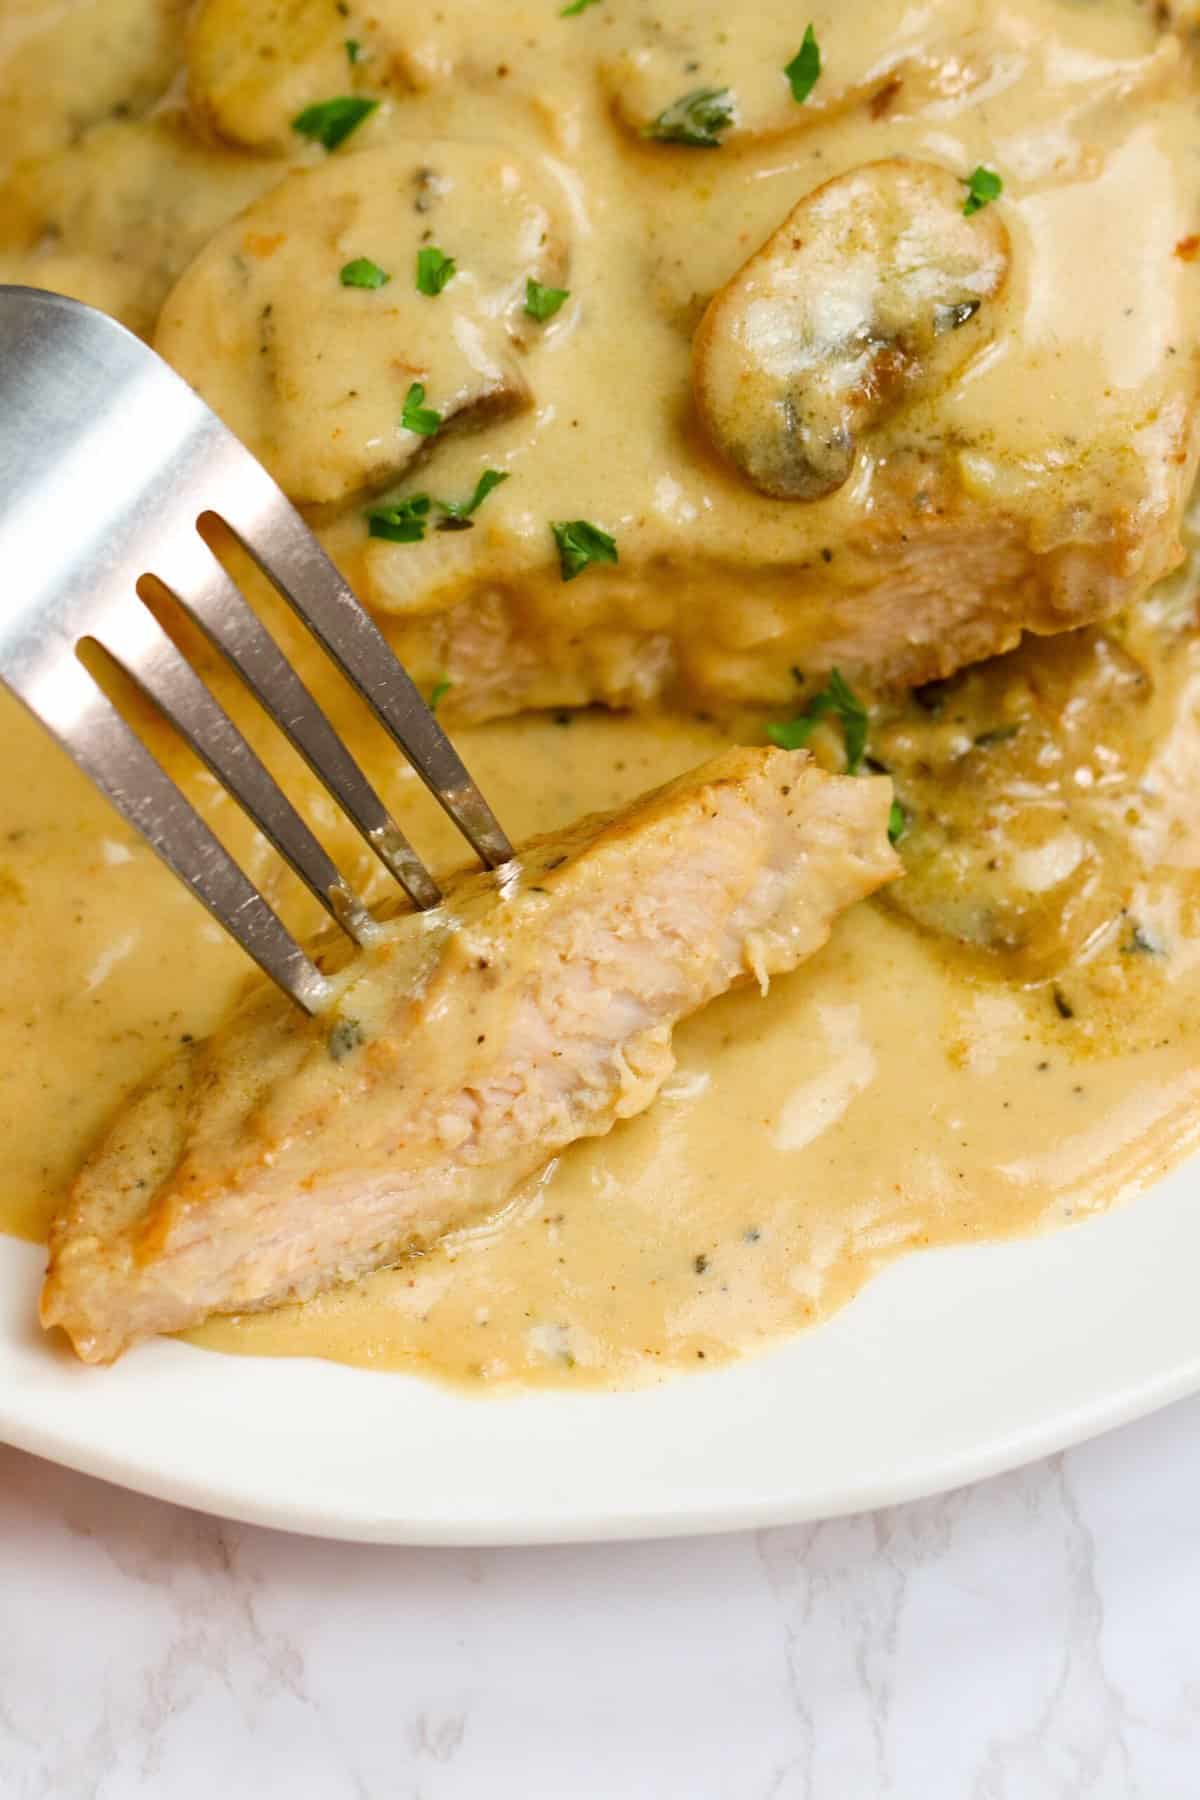 Biting into a tender pork chop smothered in cream of mushroom sauce